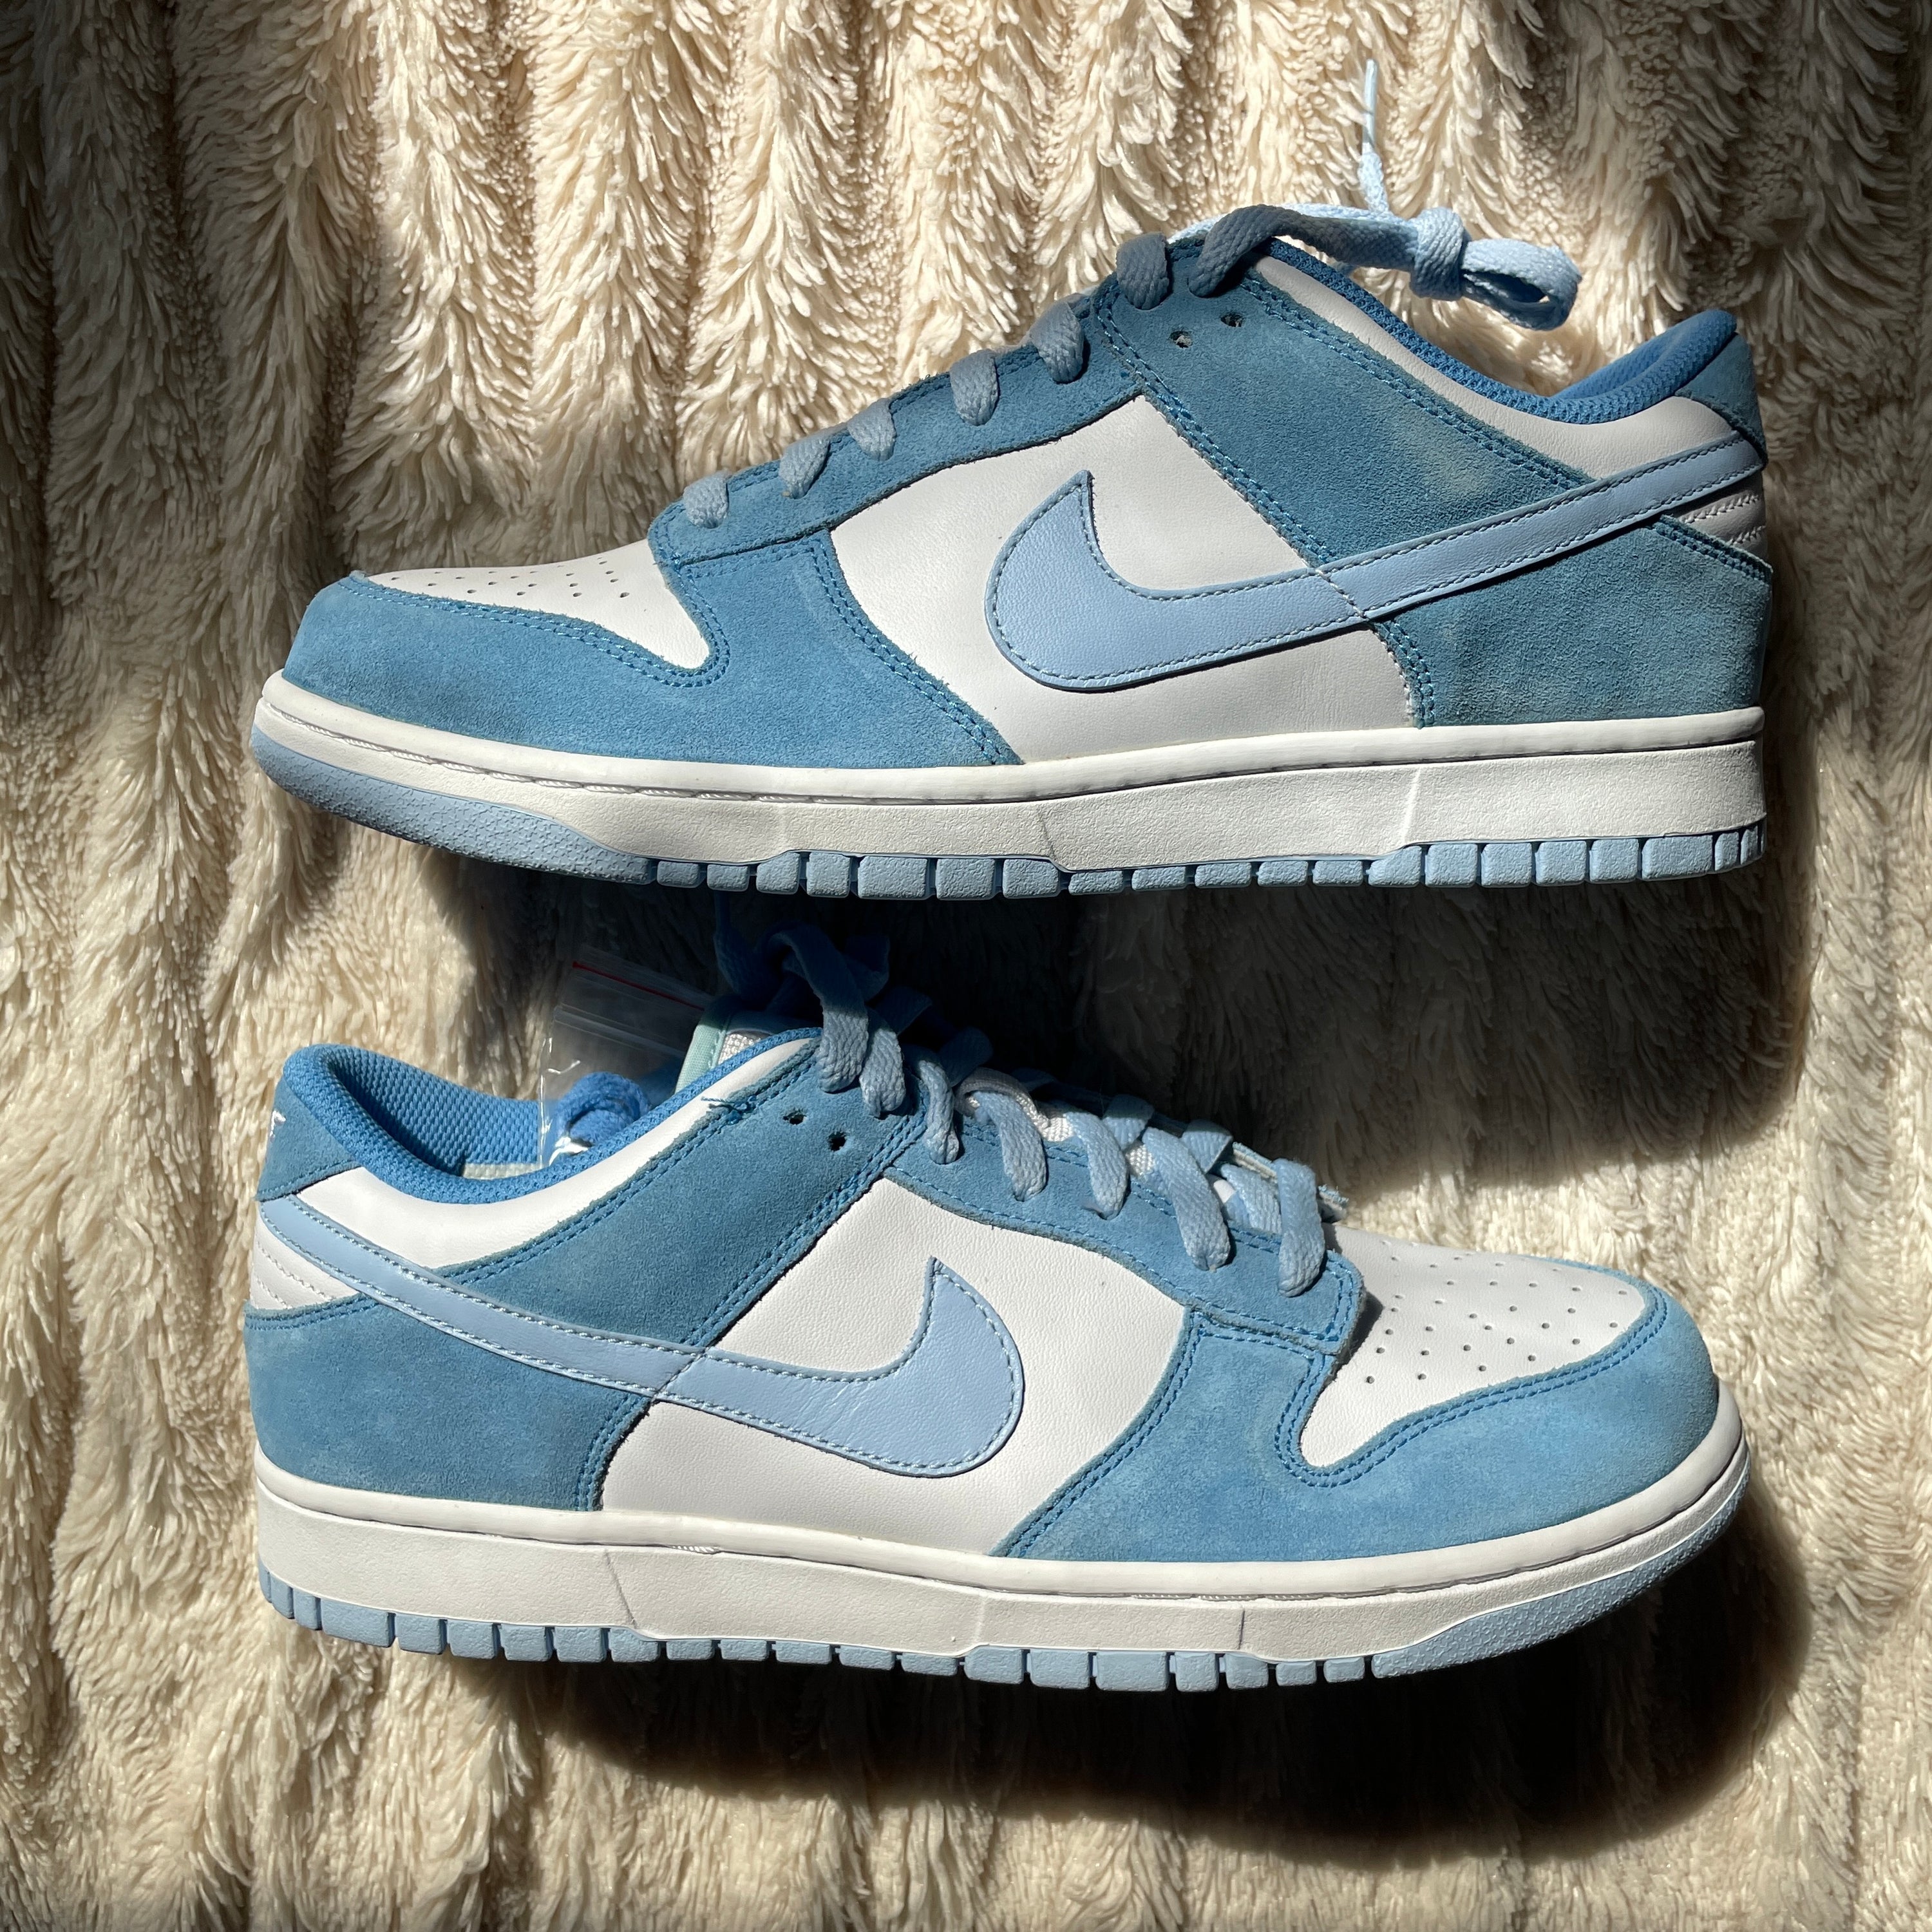 US 11W - NIKE DUNK LOW 6.0 WMNS "ICE BLUE" [2006]